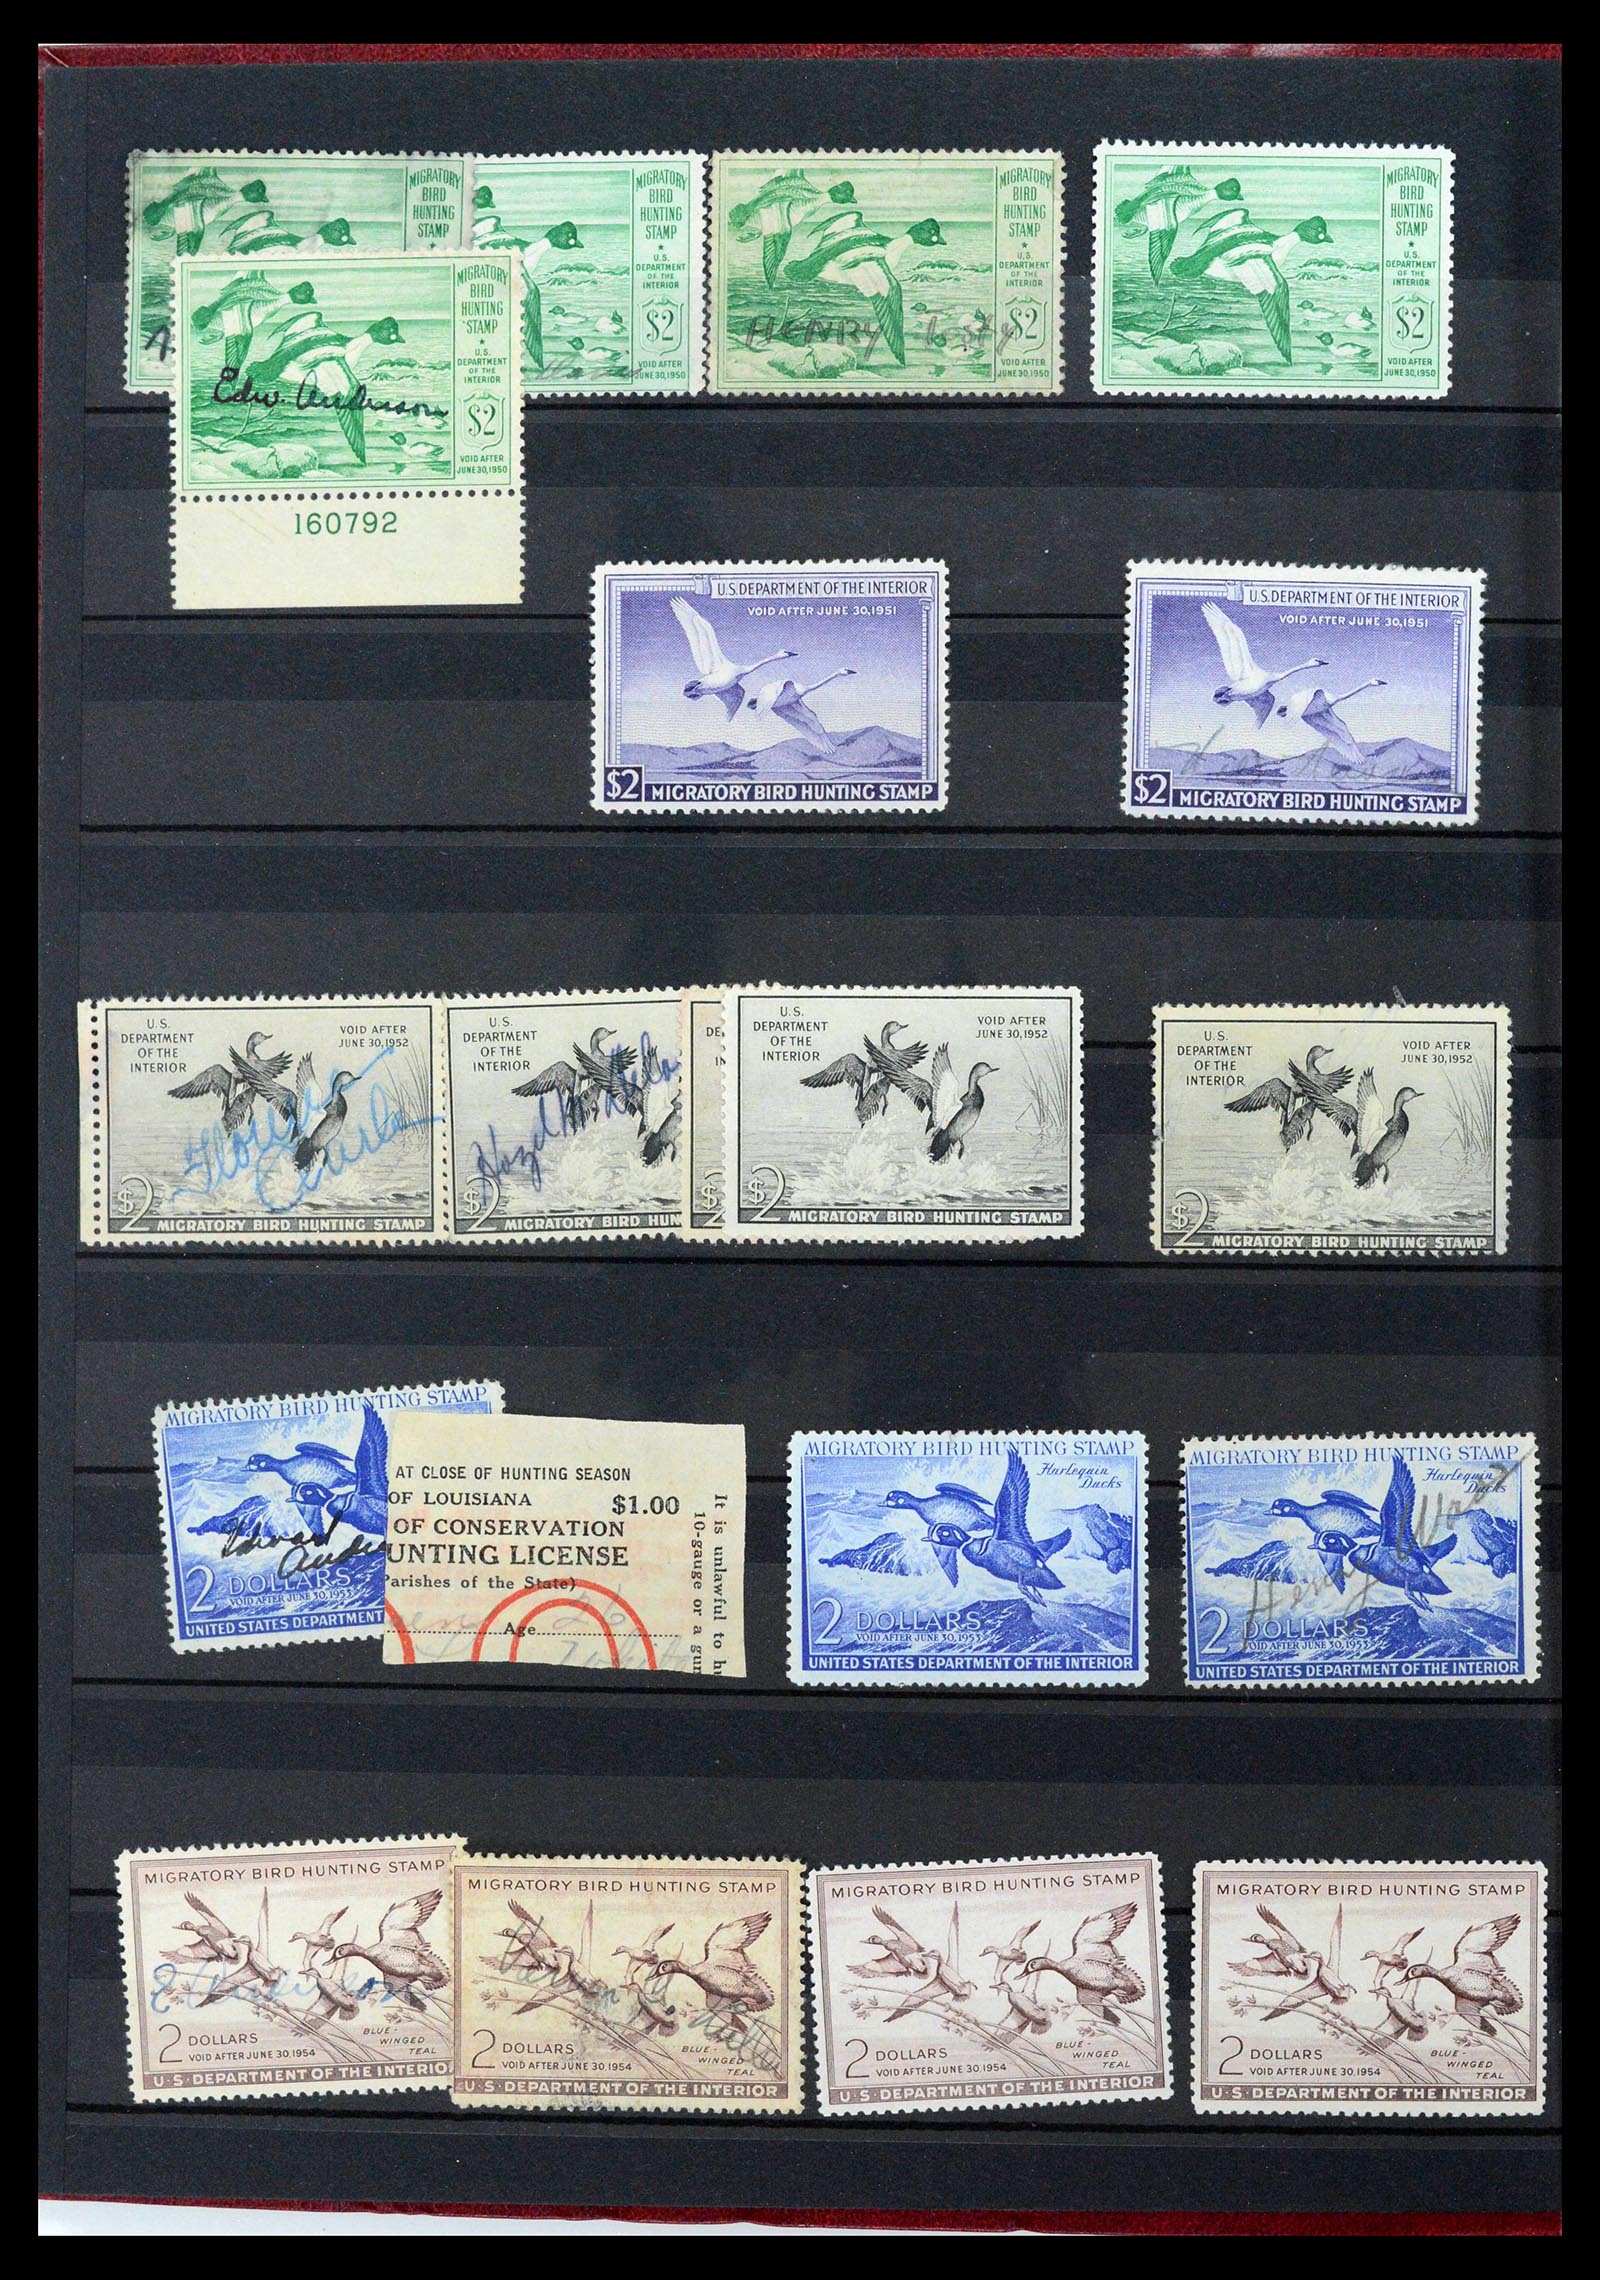 39426 0004 - Stamp collection 39426 USA duckstamps 1934-2007.